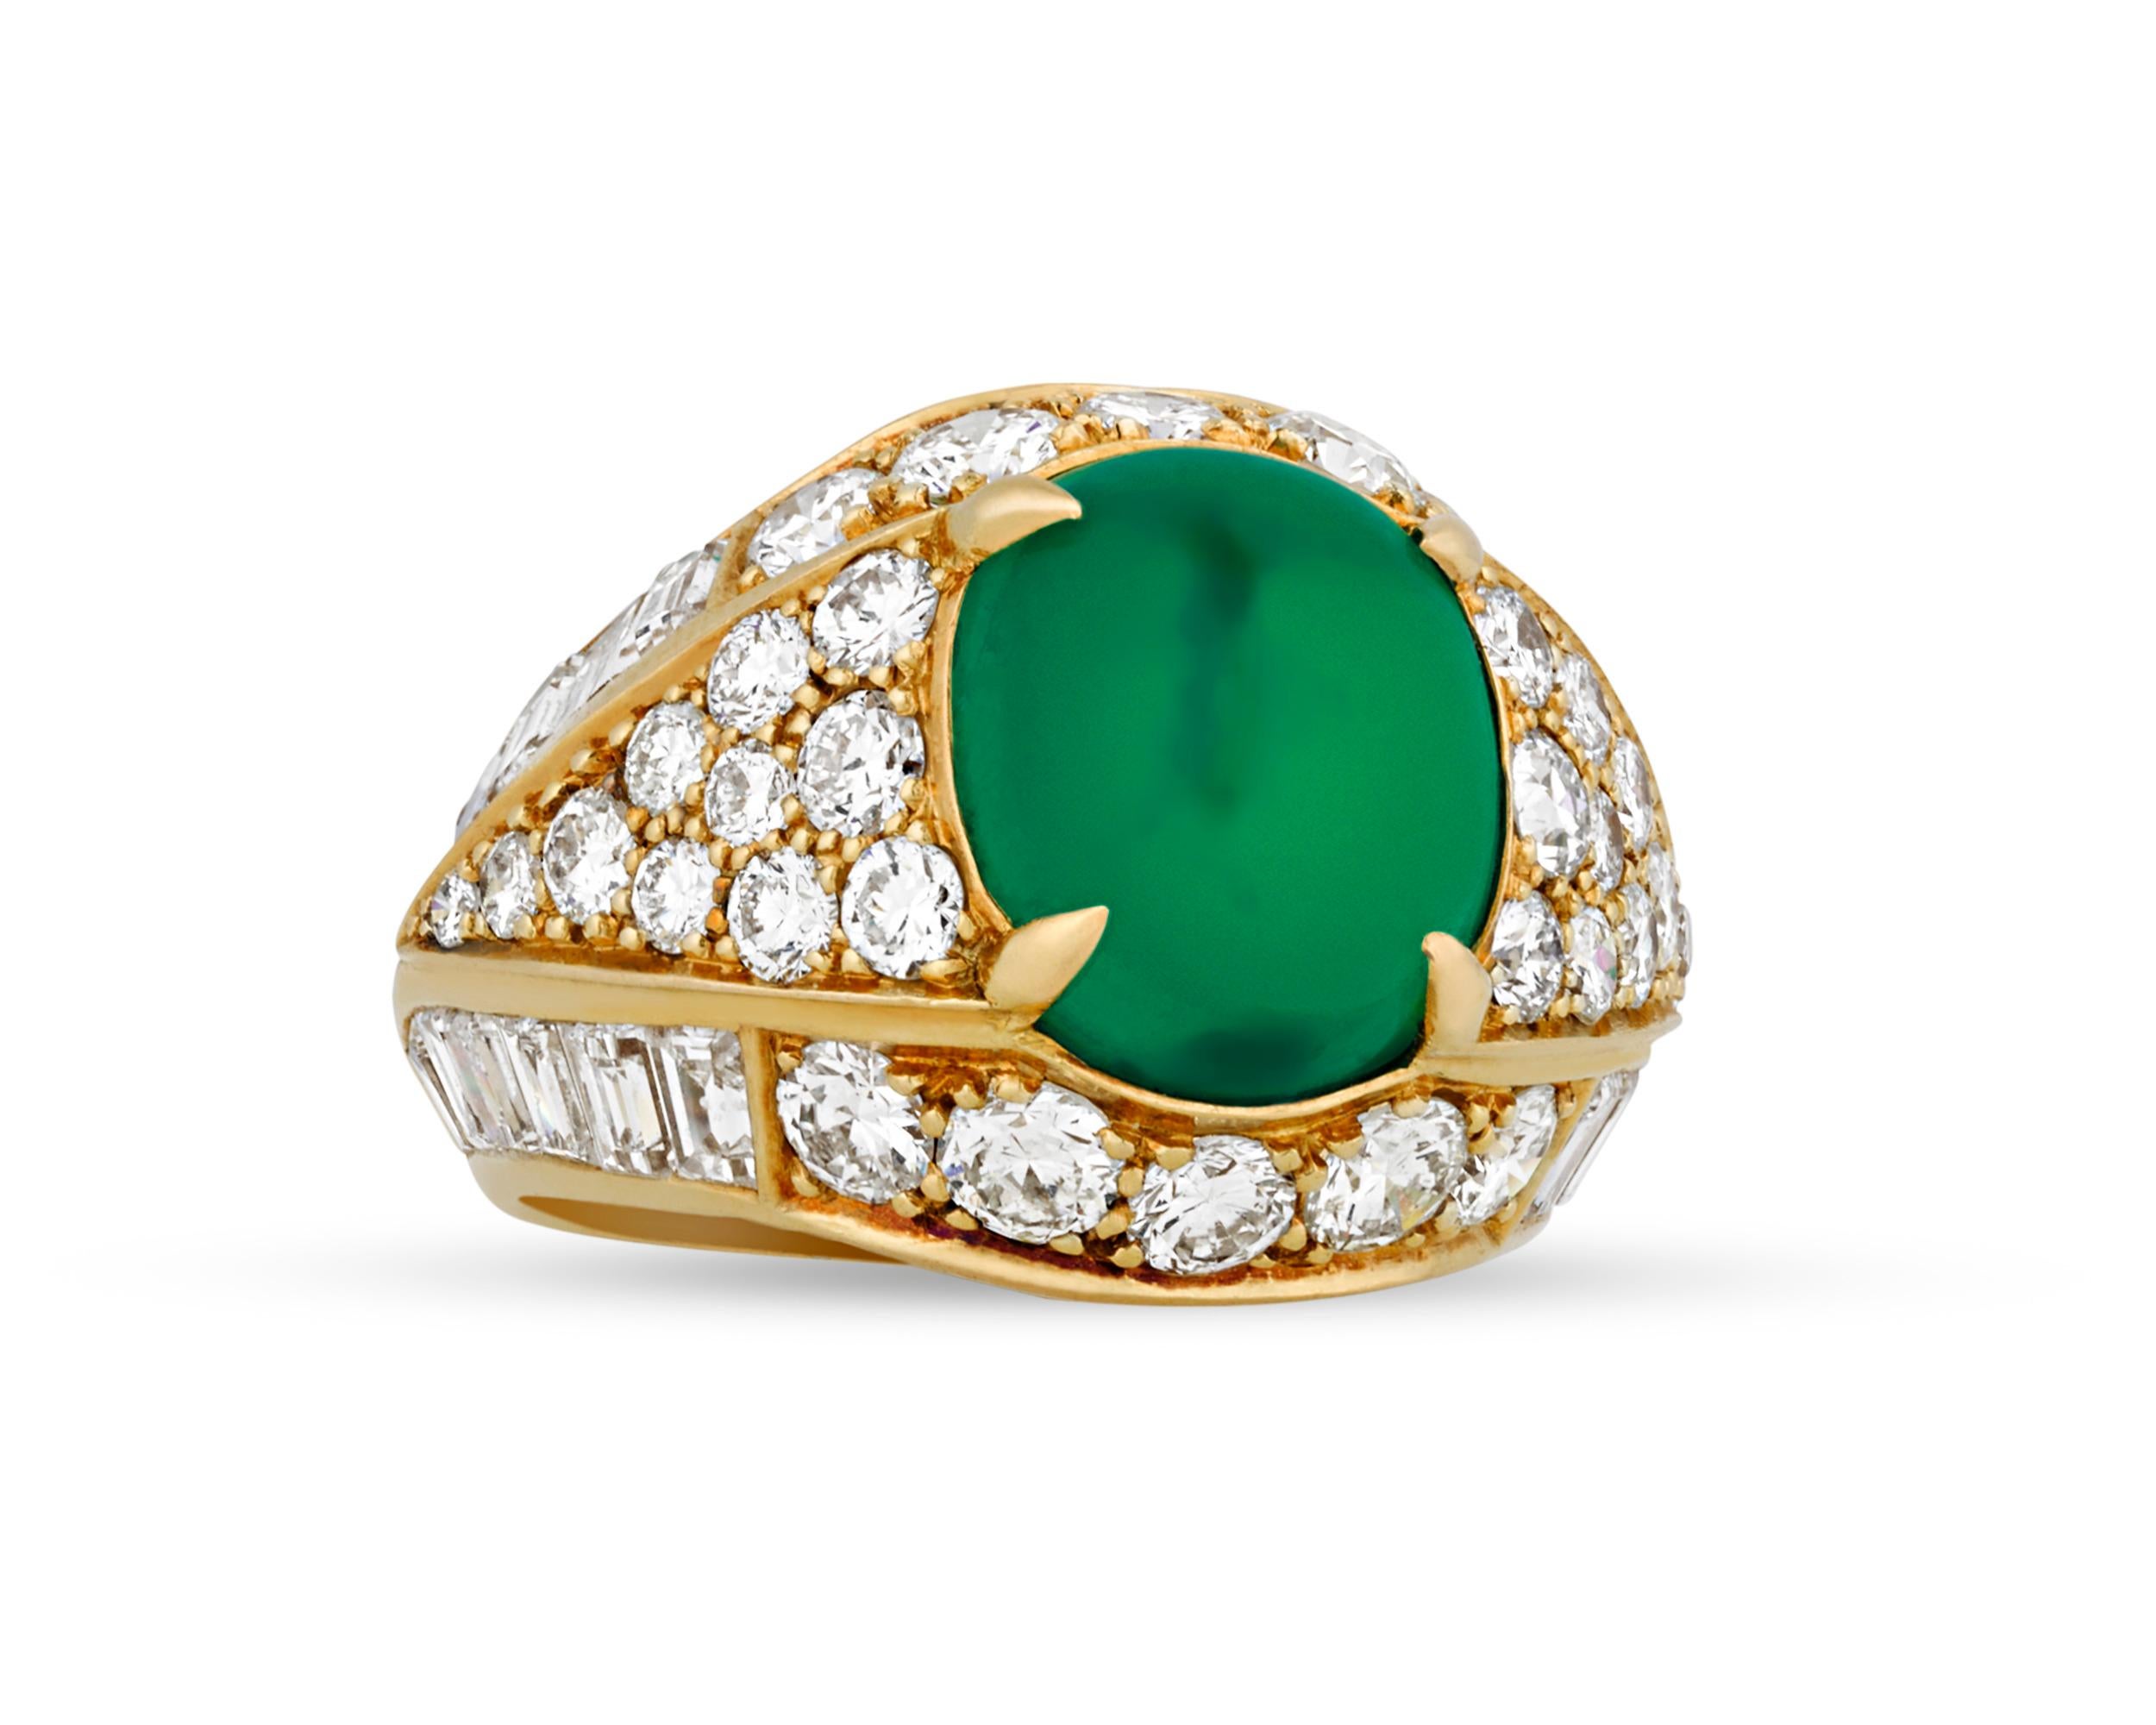 A mesmerizing cabochon Colombian emerald weighing approximately 5.40 carats exhibits a deep green hue in this bombe-style ring by the legendary firm of Van Cleef & Arpels. For centuries, Colombia has been the prime location for mining the finest